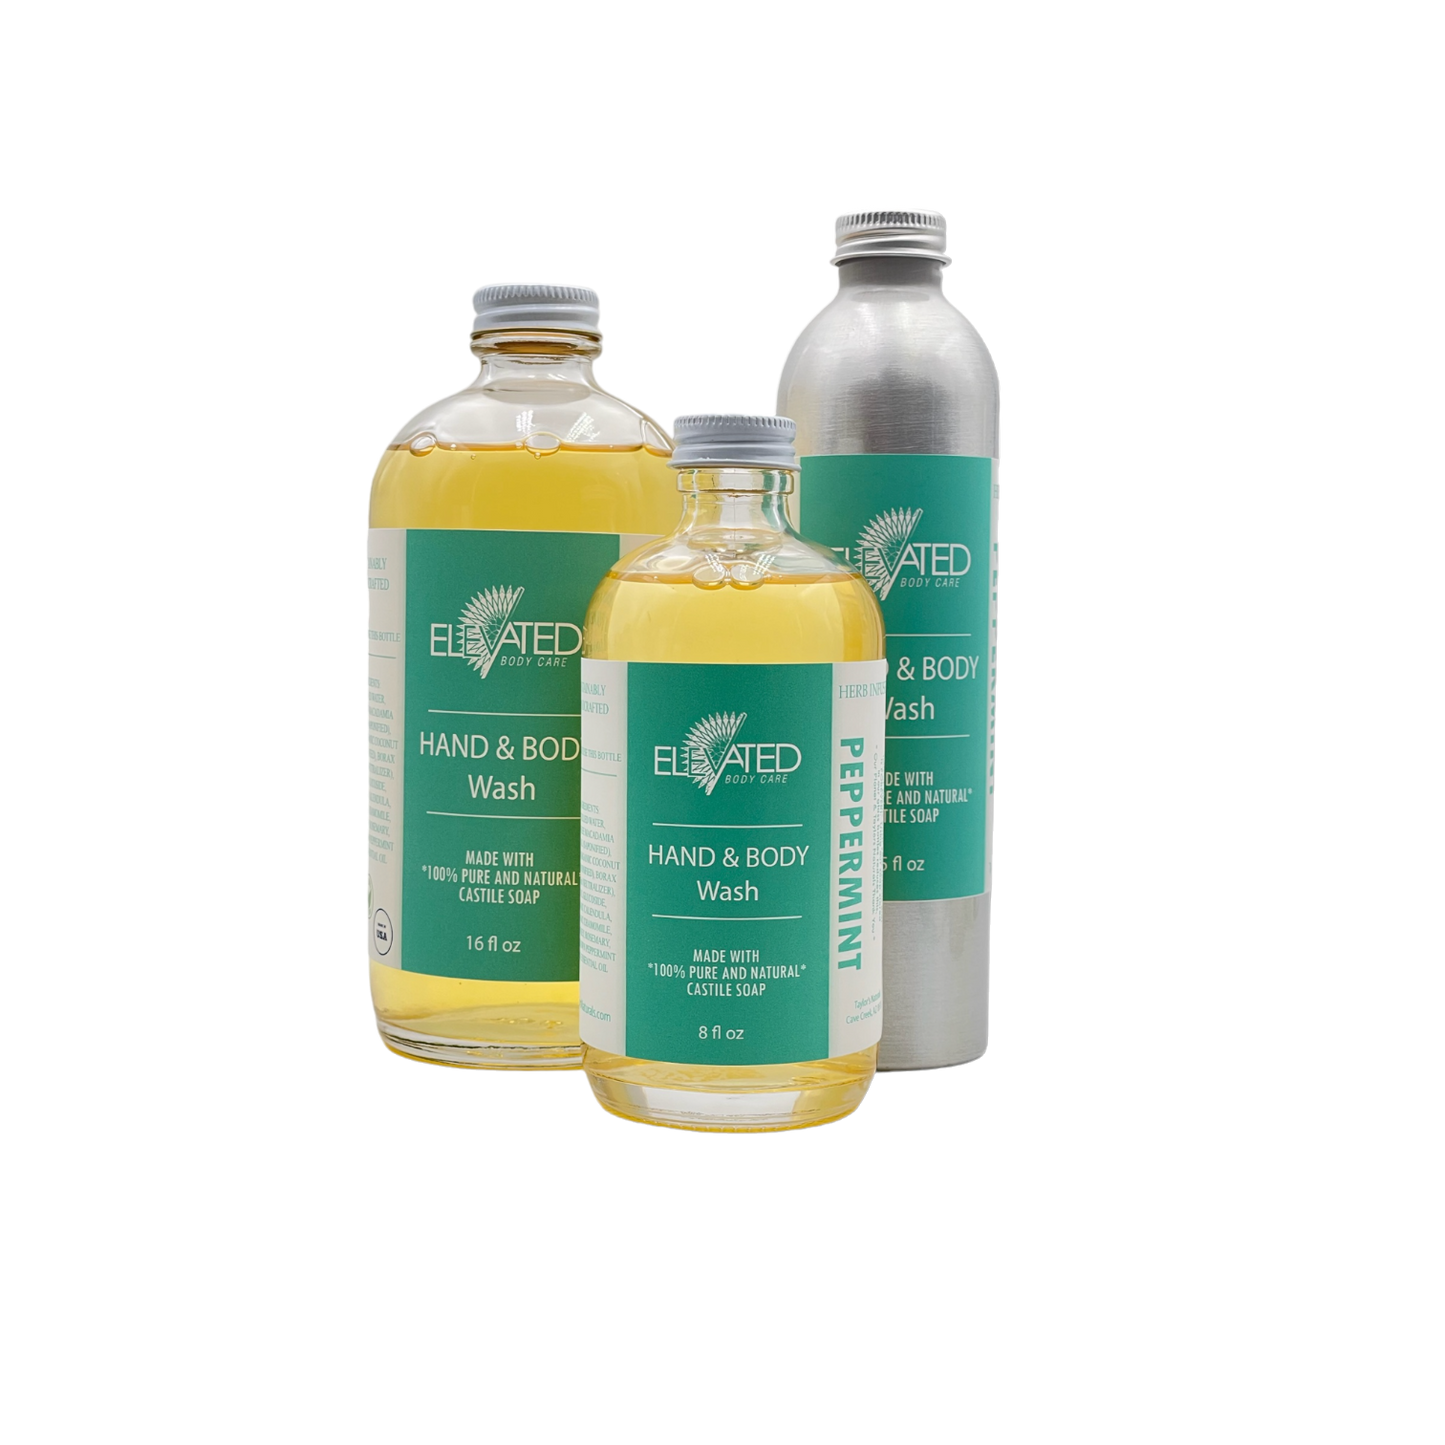 ELEVATED - Herbal Hand & Body Wash - Glass or Aluminum